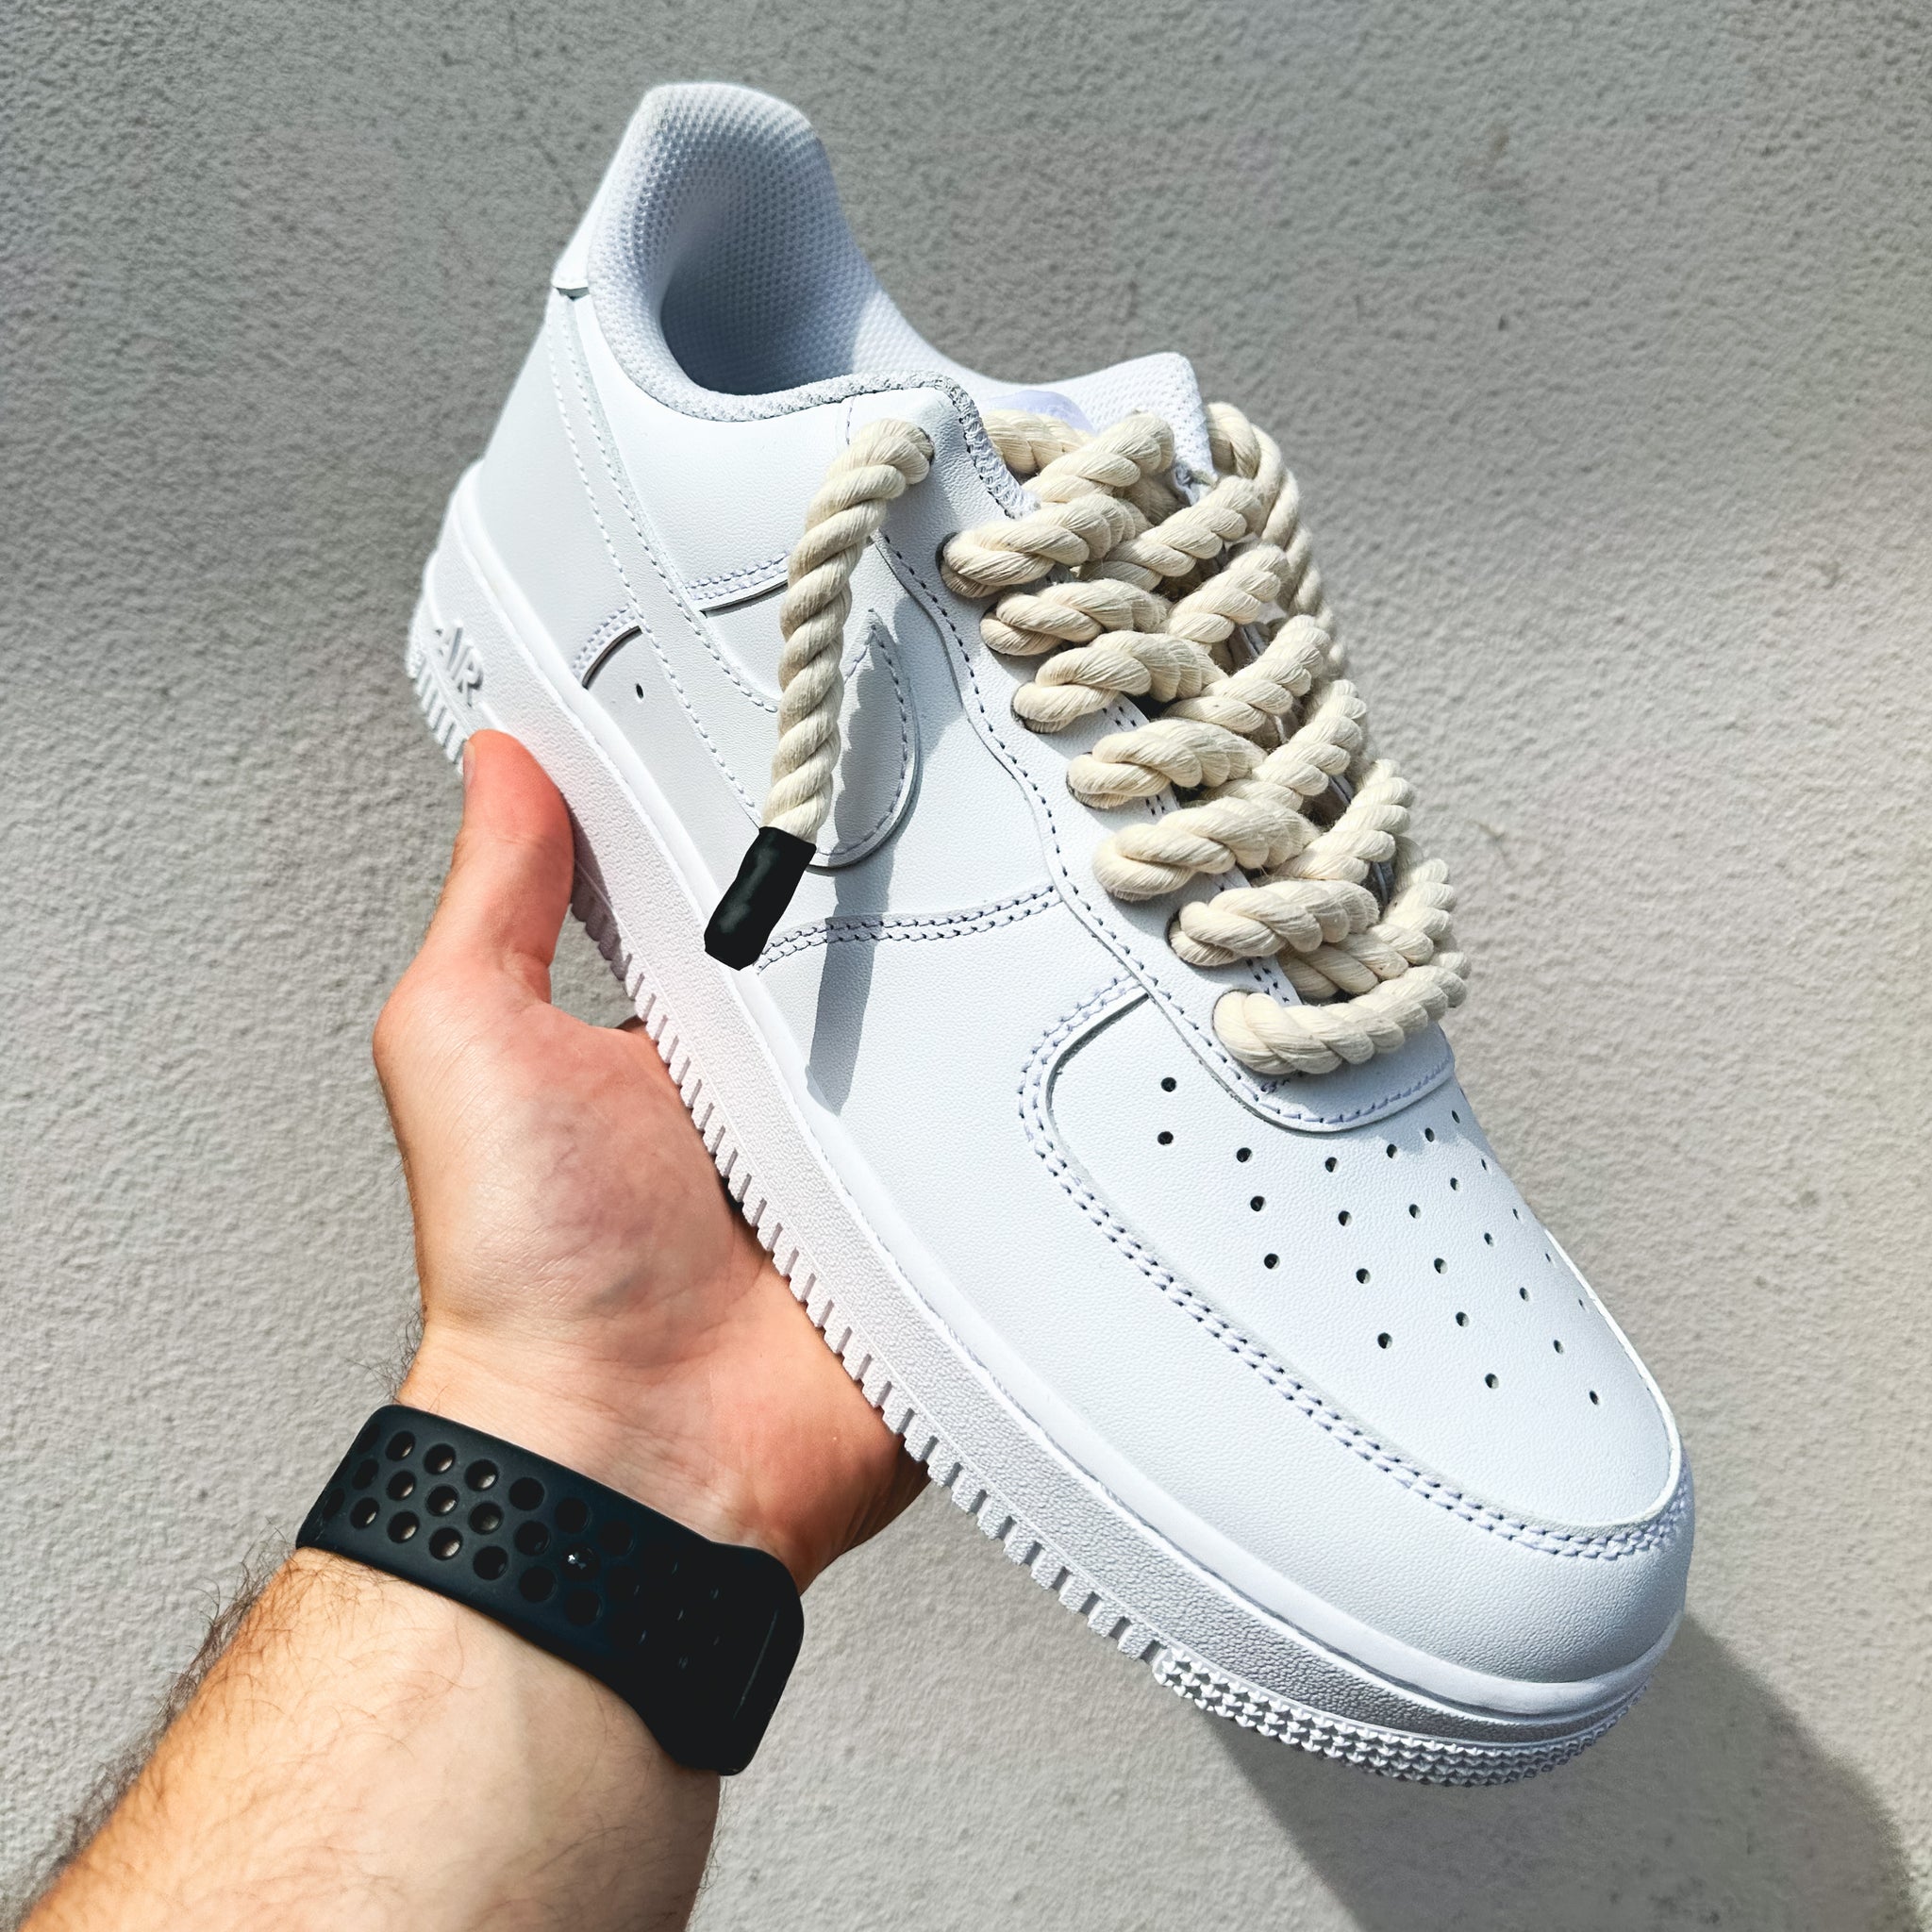 Super Chunky Thick Braided Rope AF1 Shoelaces for Air Force 1